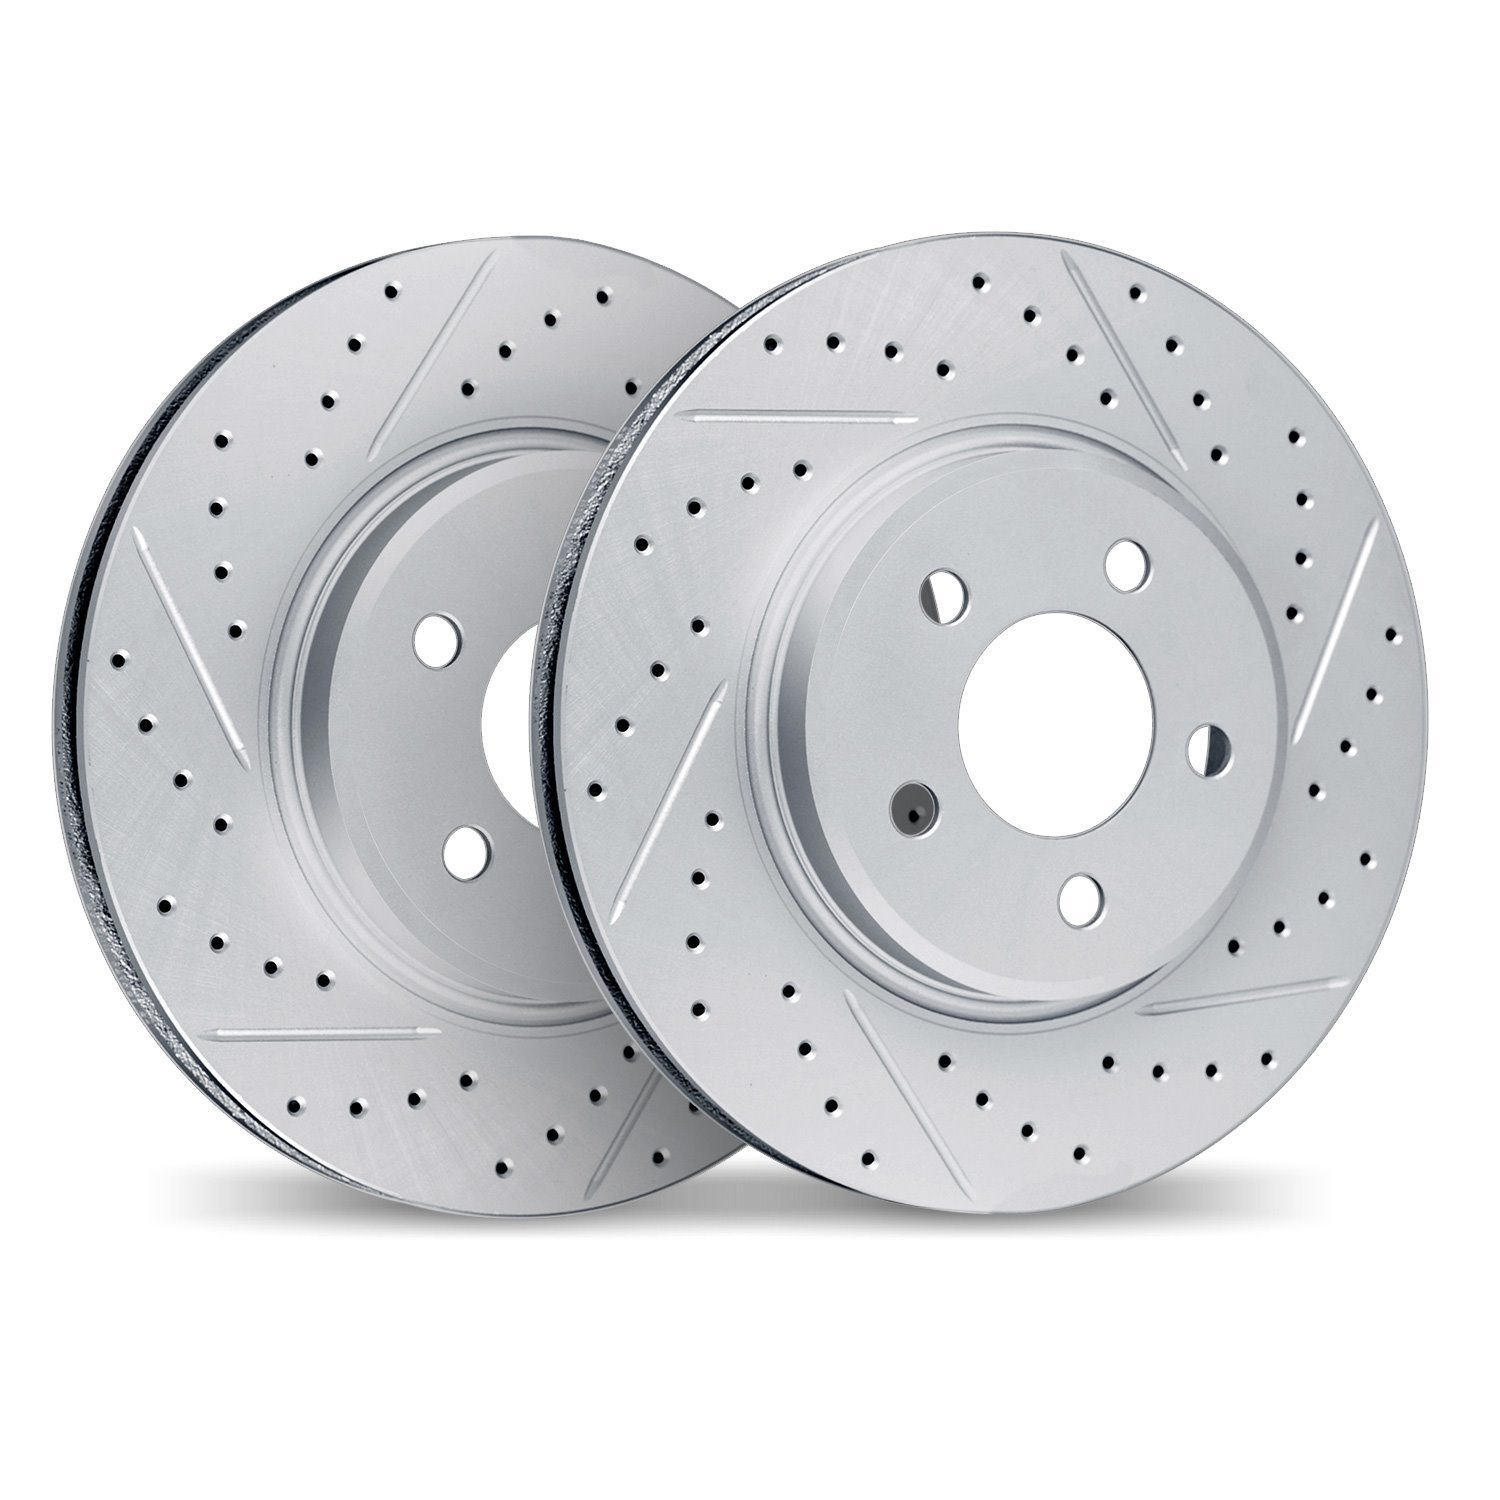 2002-58010 Geoperformance Drilled/Slotted Brake Rotors, 2004-2008 Acura/Honda, Position: Front